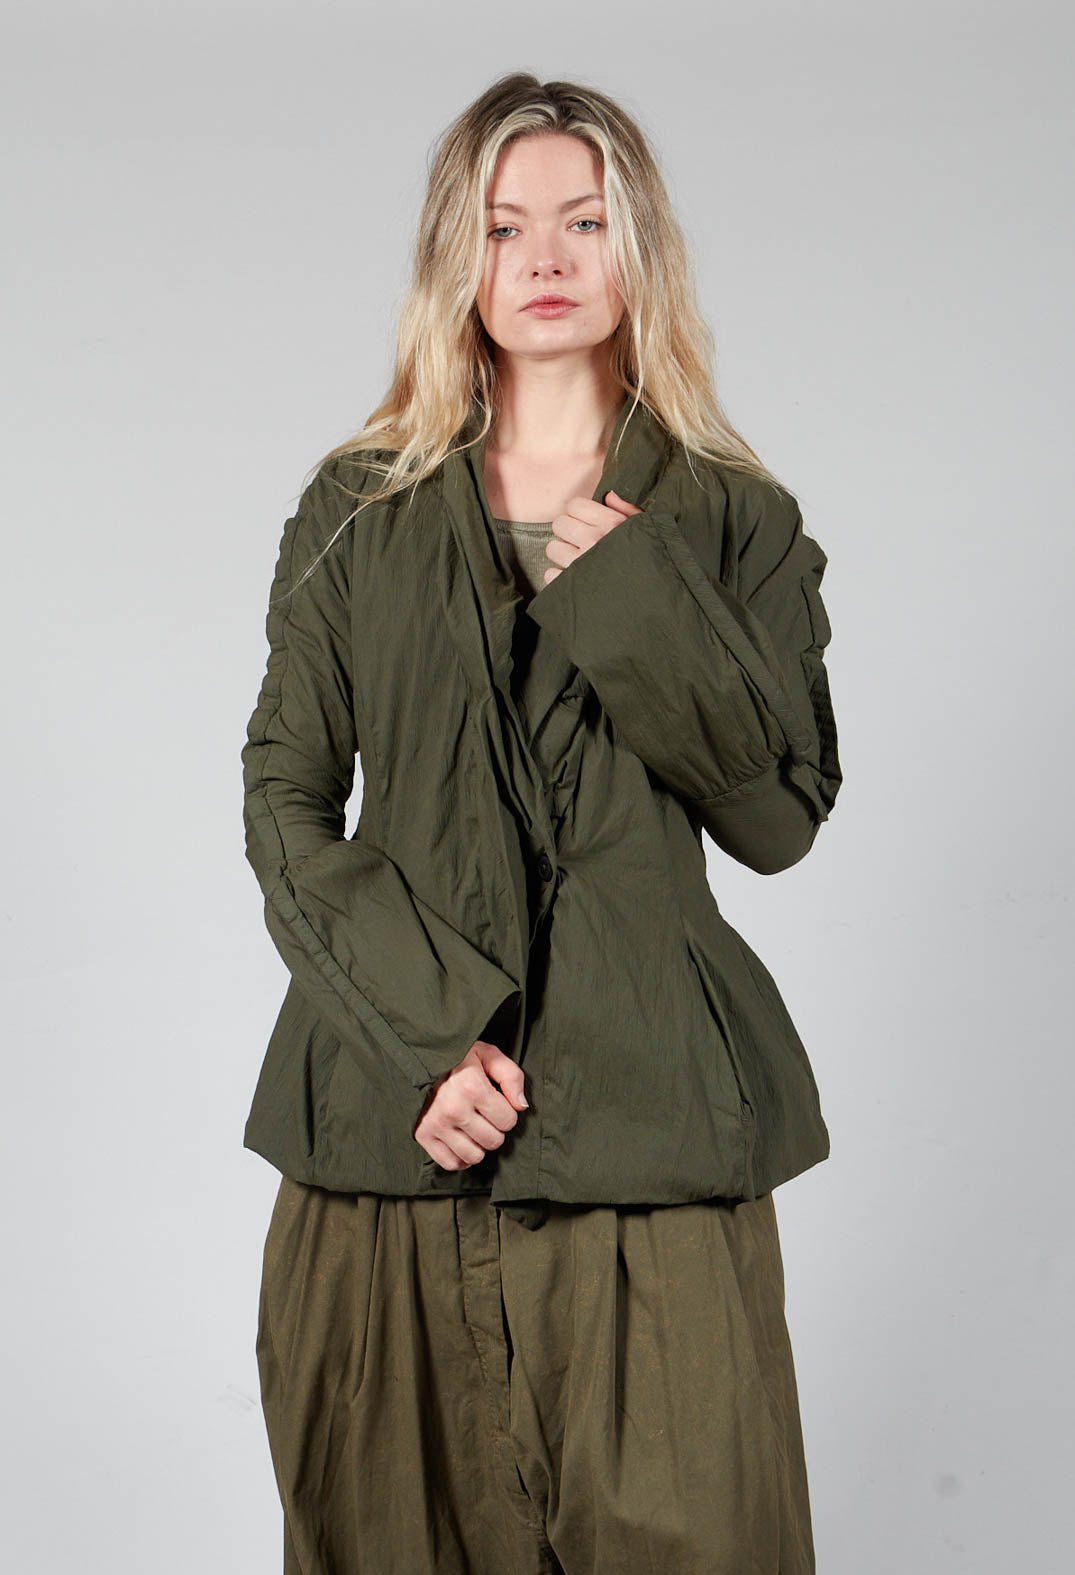 Ruched Fabric Collar Jacket With Statement Sleeves in Olive